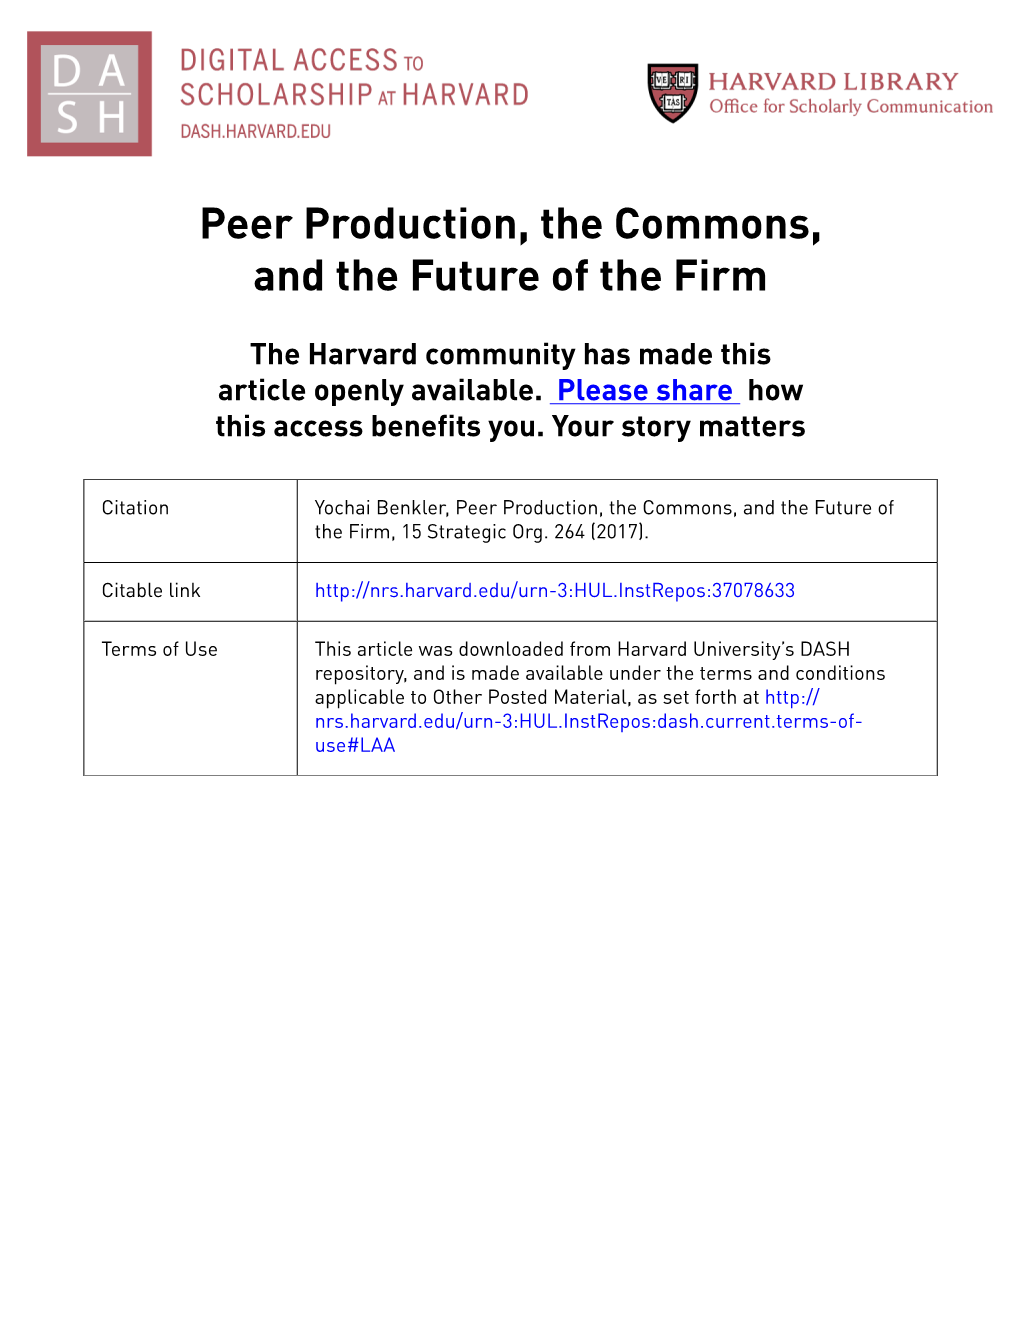 Peer Production, the Commons, and the Future of the Firm